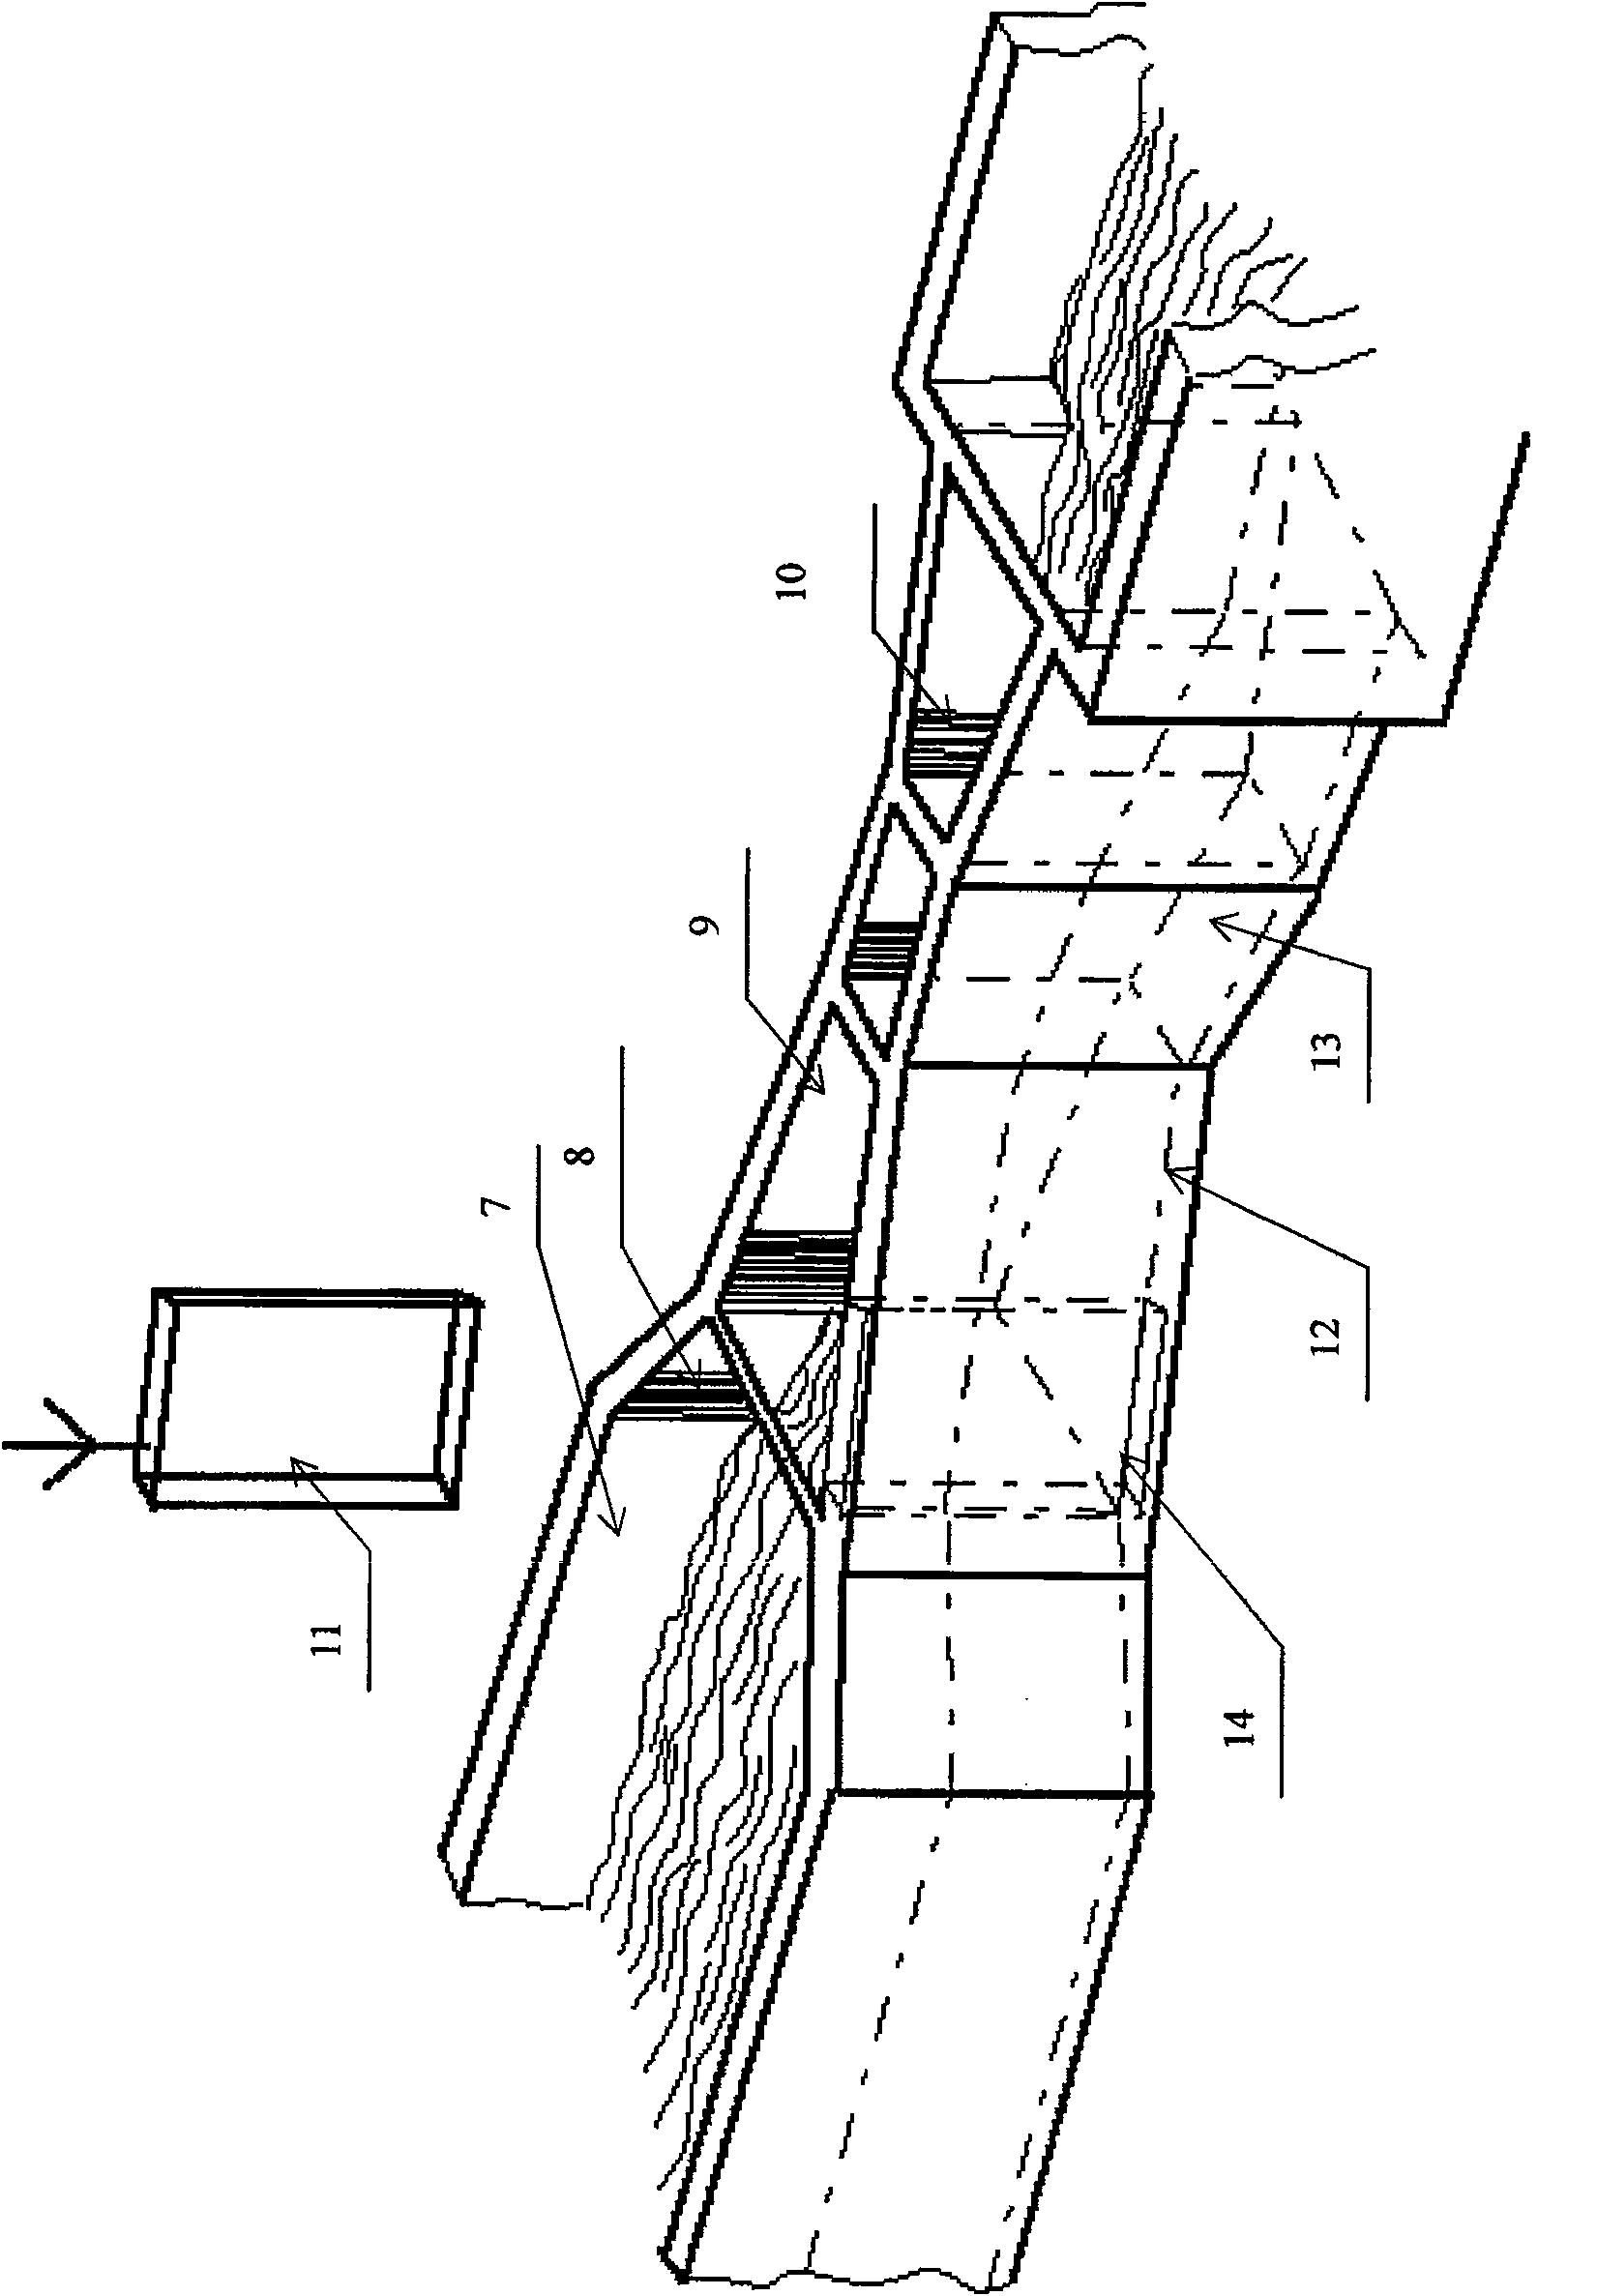 Preparation of trough body flow detecting plate type intelligent device